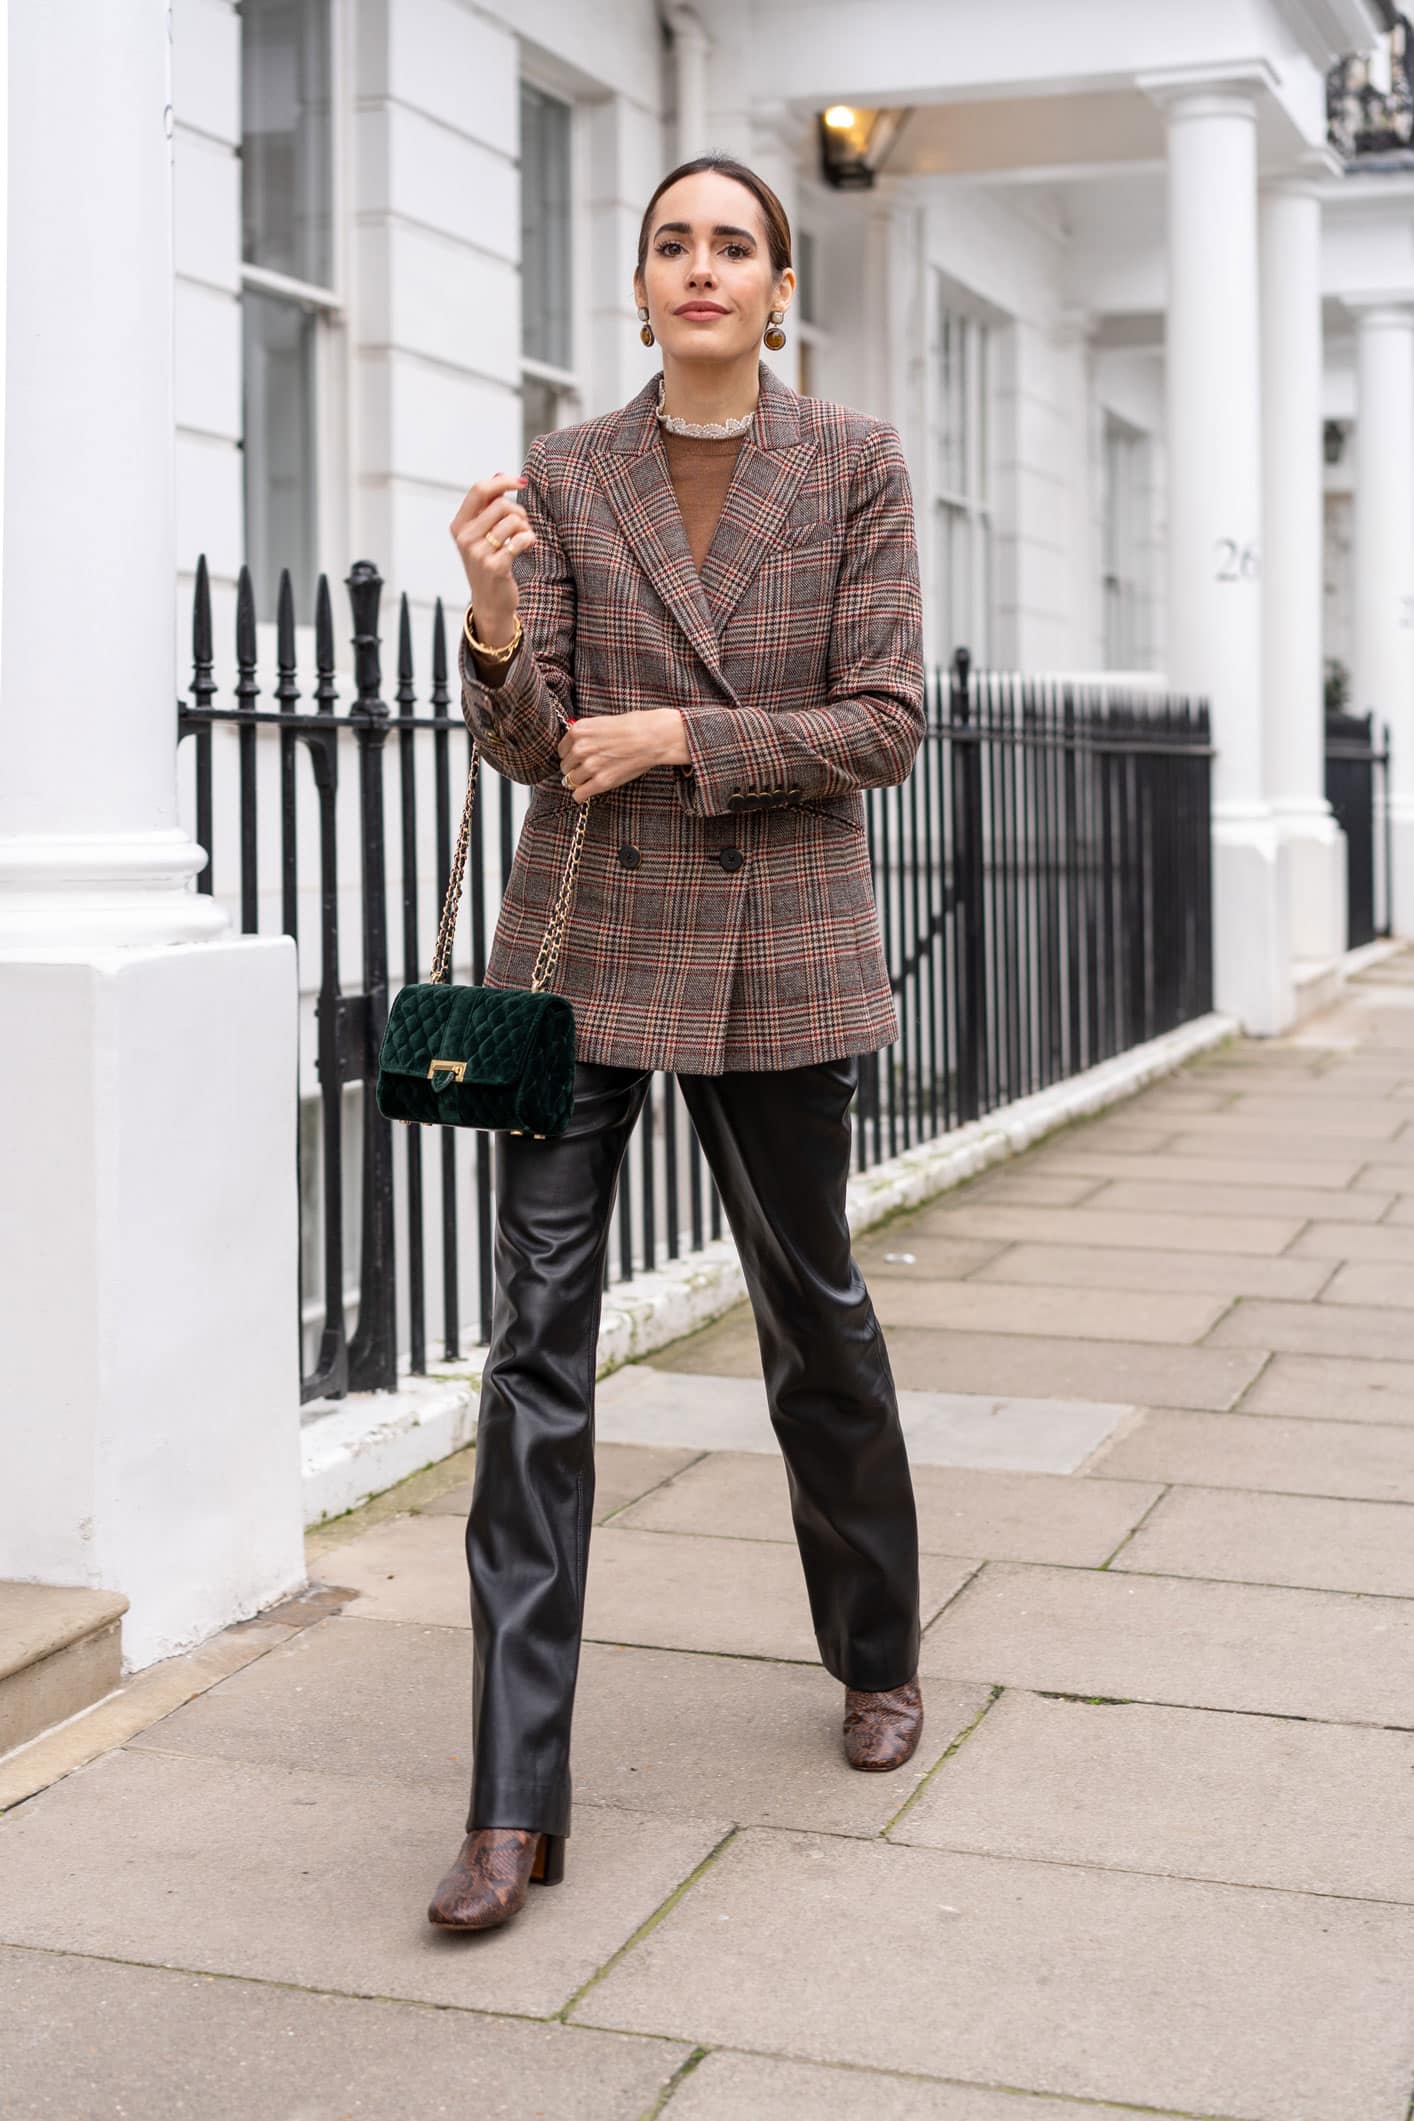 Louise Roe of Front Roe in a classic tweed jacket